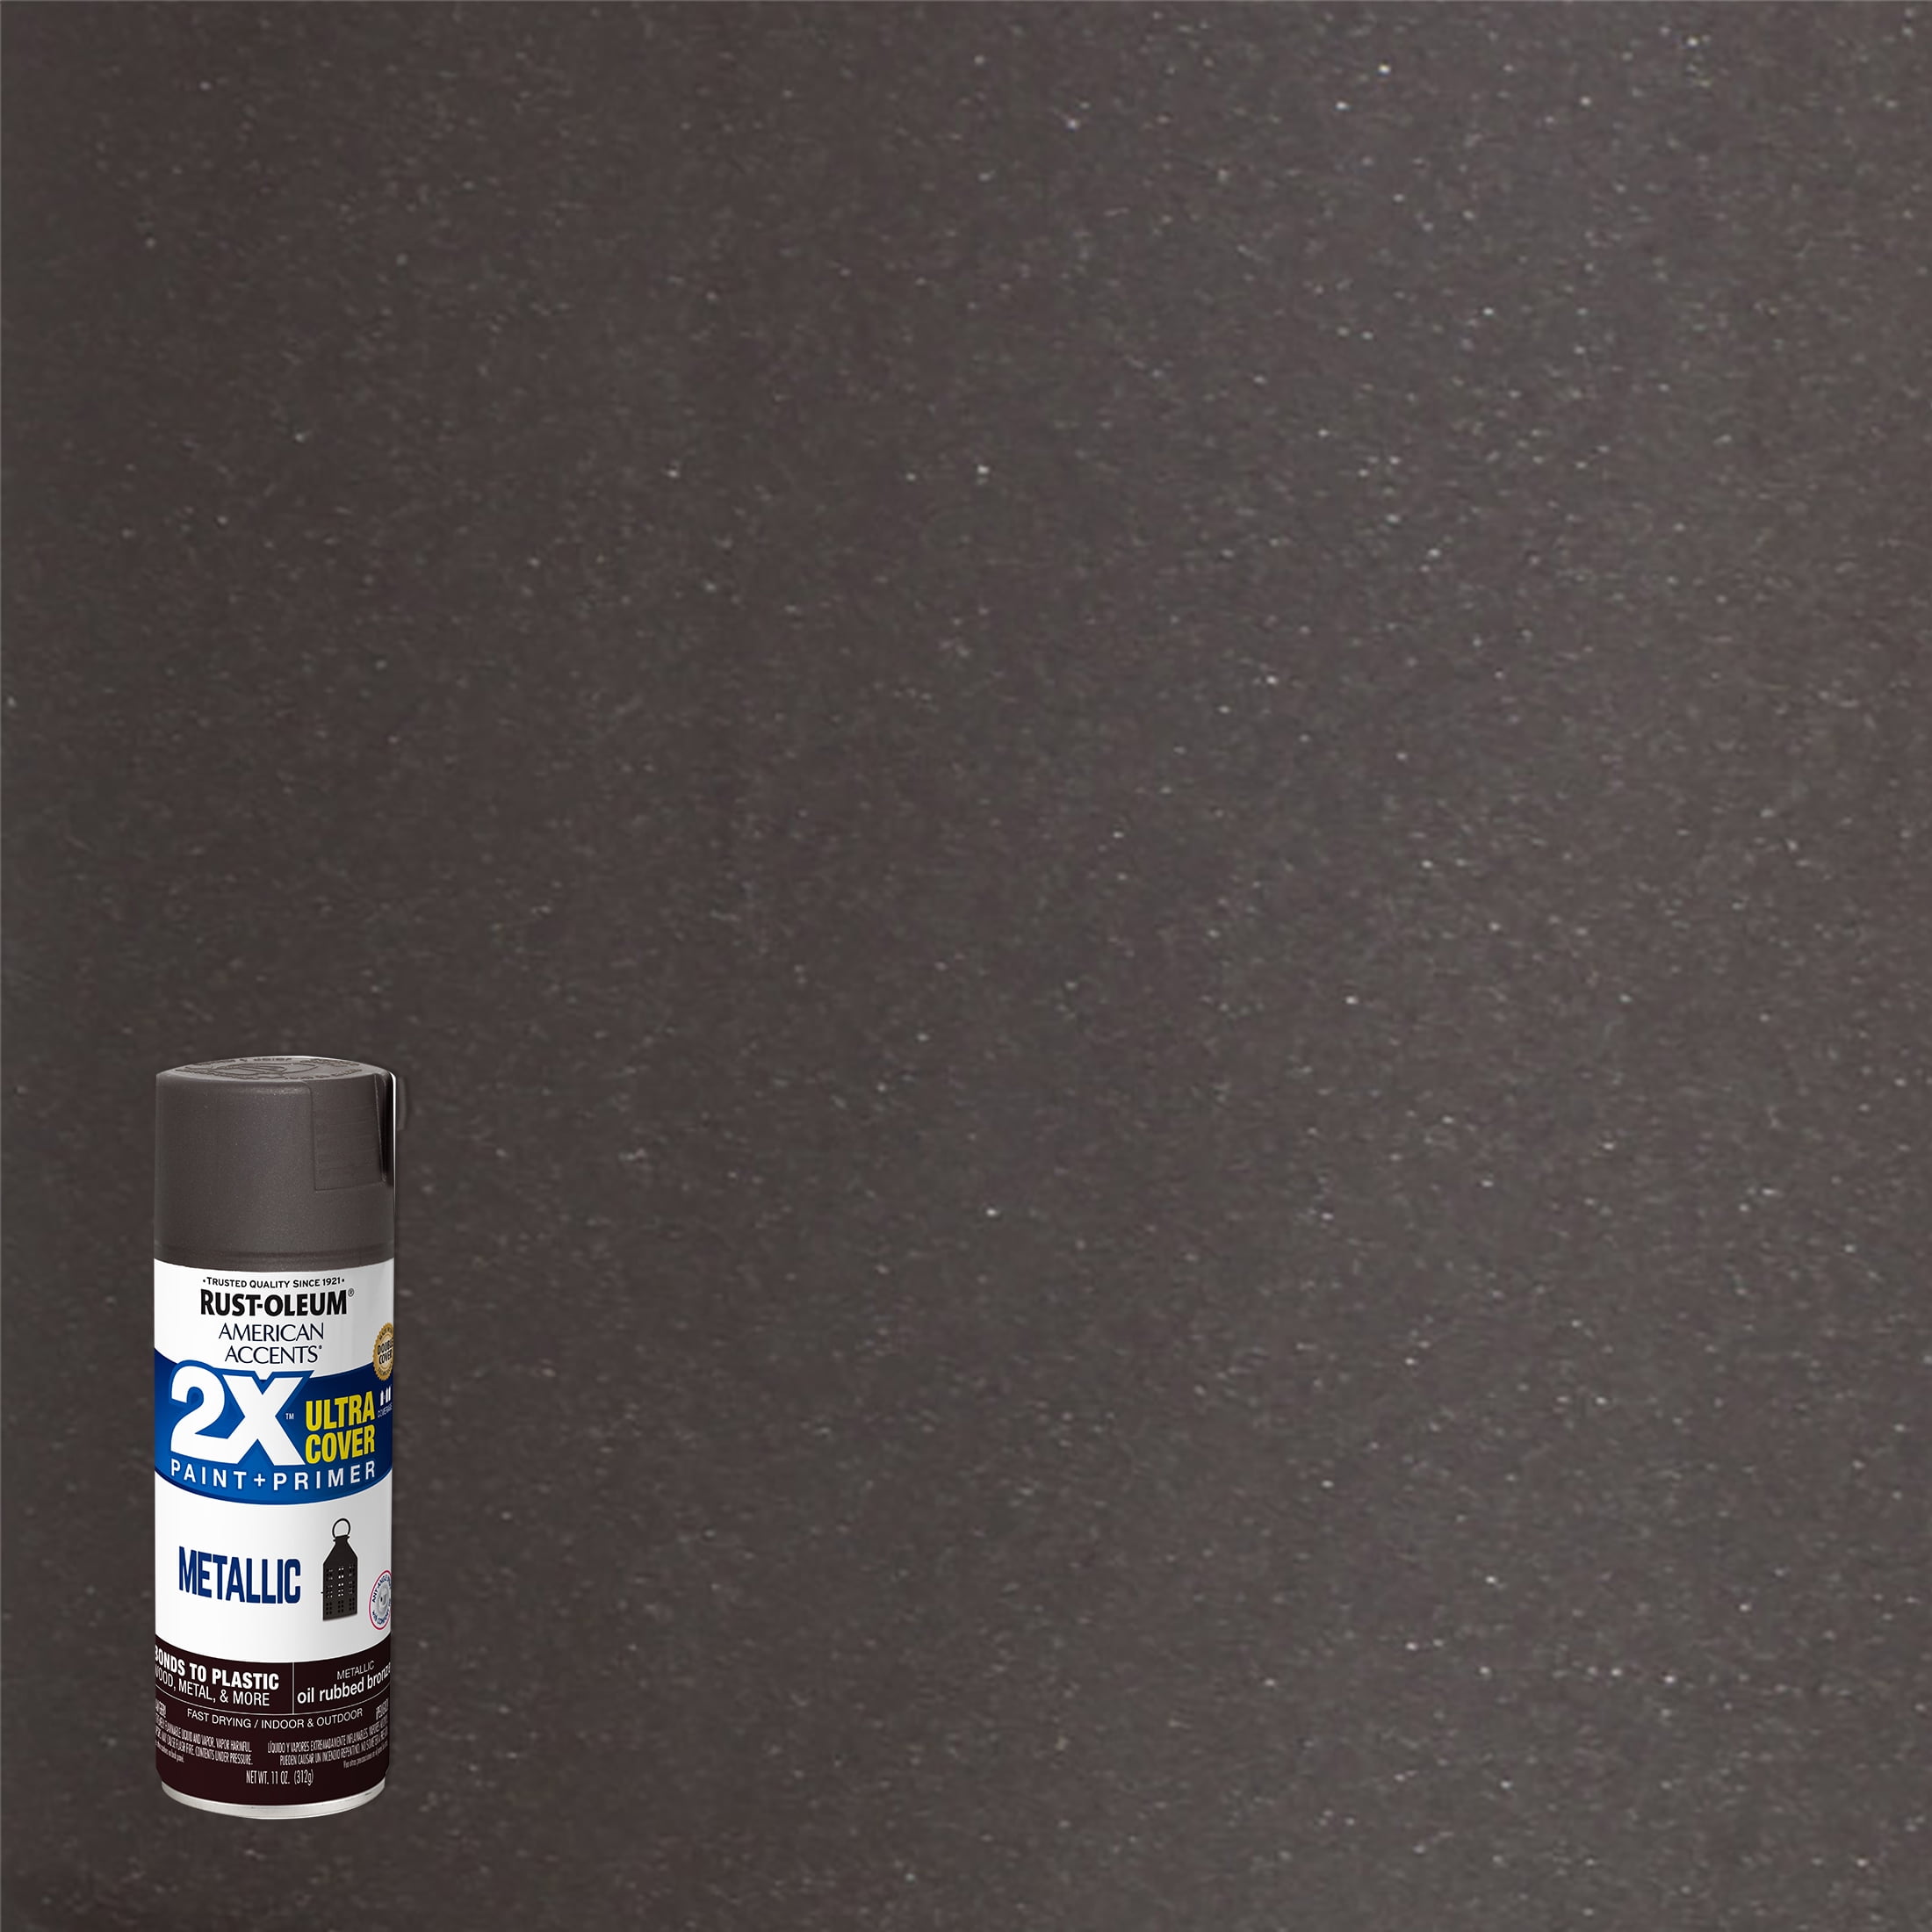  Rust-Oleum 327906 American Accents Spray Paint, 11 oz, Metallic  Oil Rubbed Bronze : Everything Else